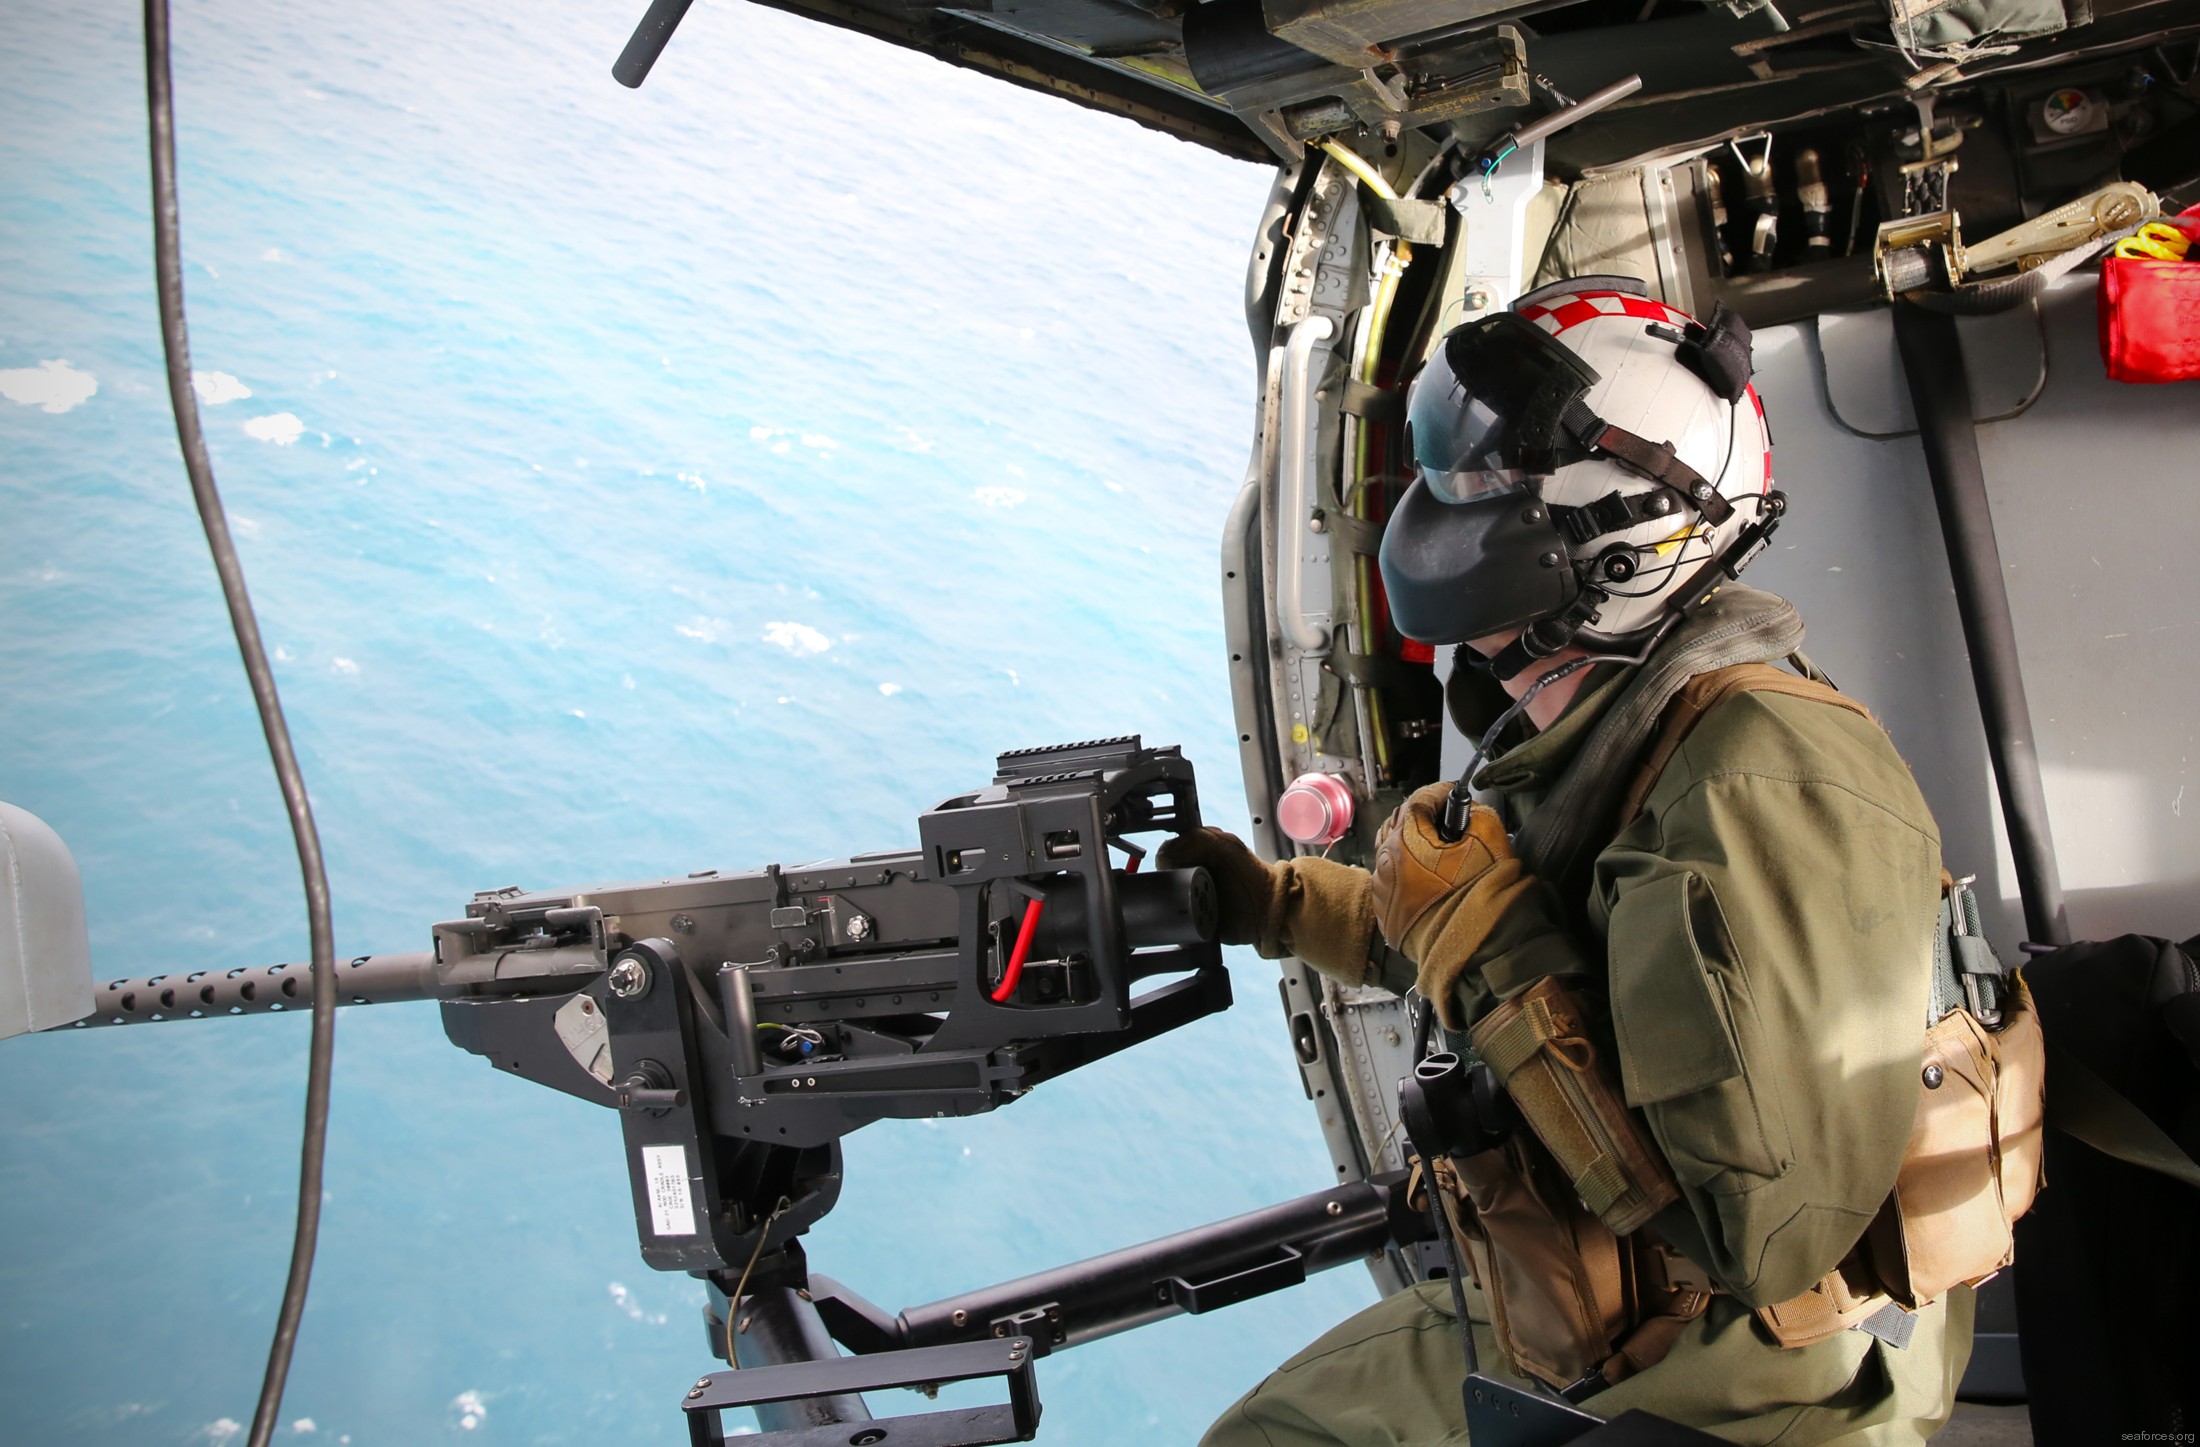 hsc-28 dragon whales helicopter sea combat squadron mh-60s seahawk us navy 99 caliber .50 machine gun fire exercise